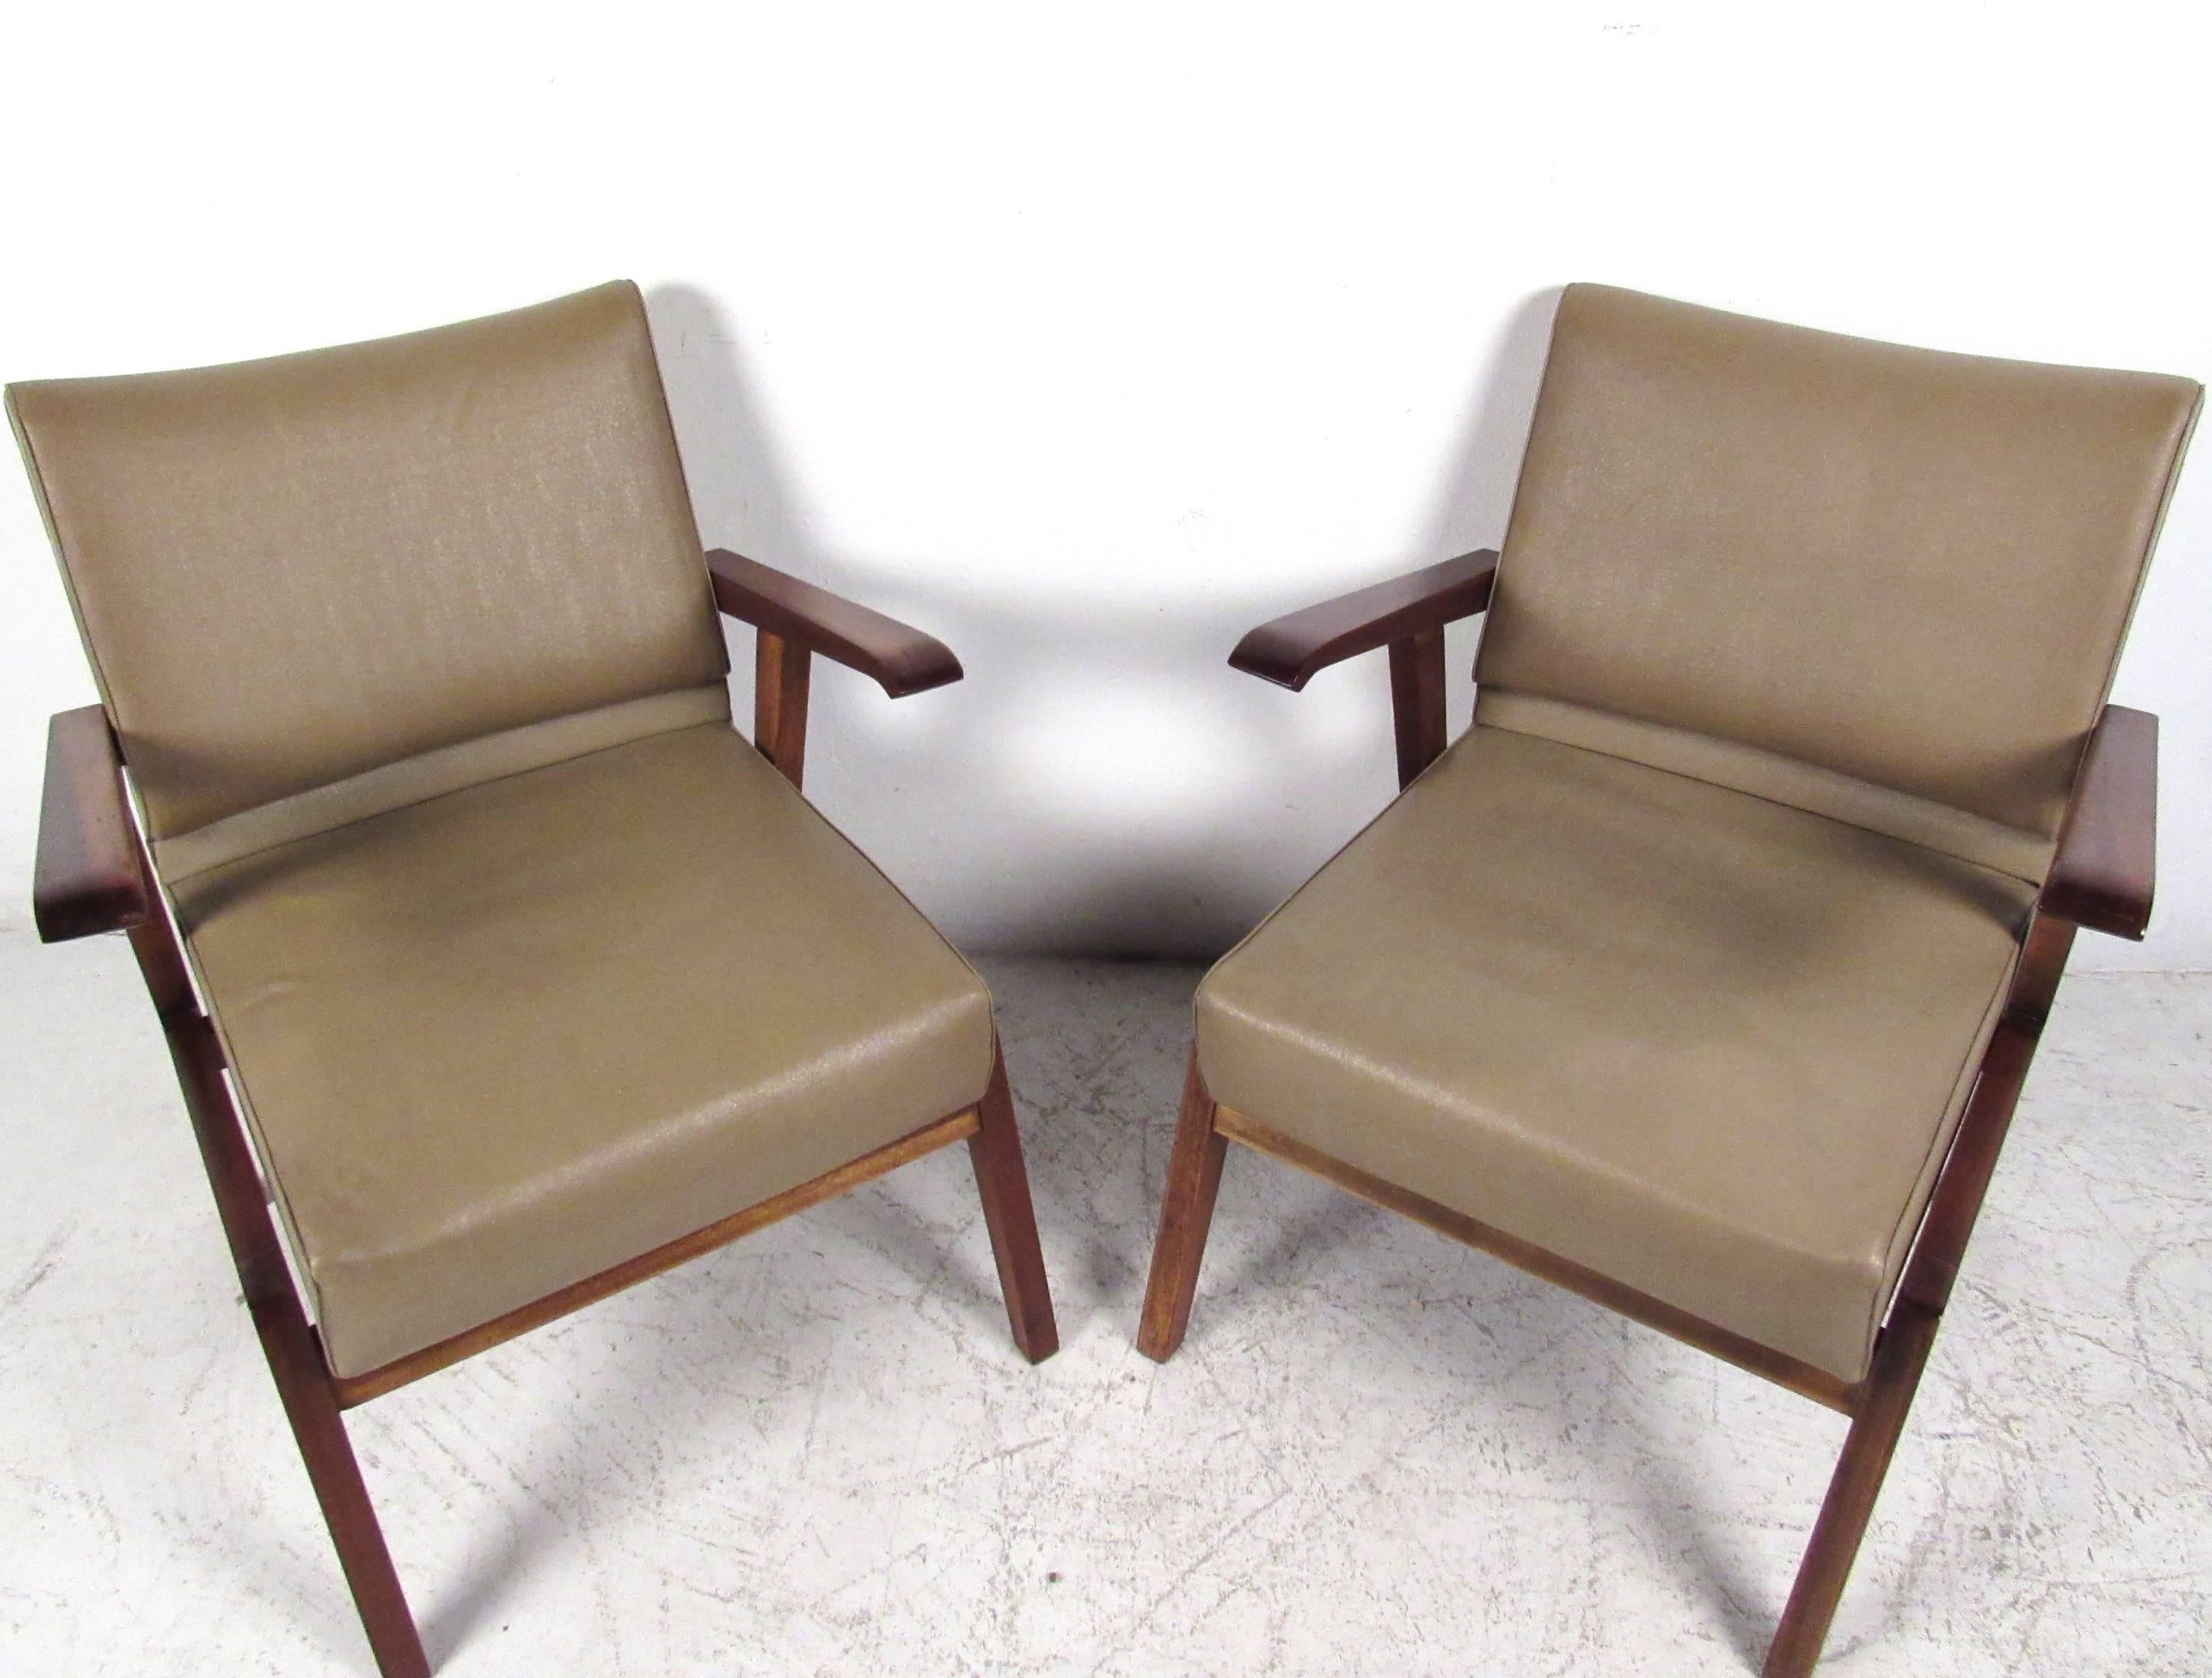 This uniquely styled pair of vintage armchairs make a comfortable and stylish addition to a variety of settings. Ideal for home or office, curved floating hardwood armrests compliment the ergonomic design of the seat back. Magazzini Generali. Please